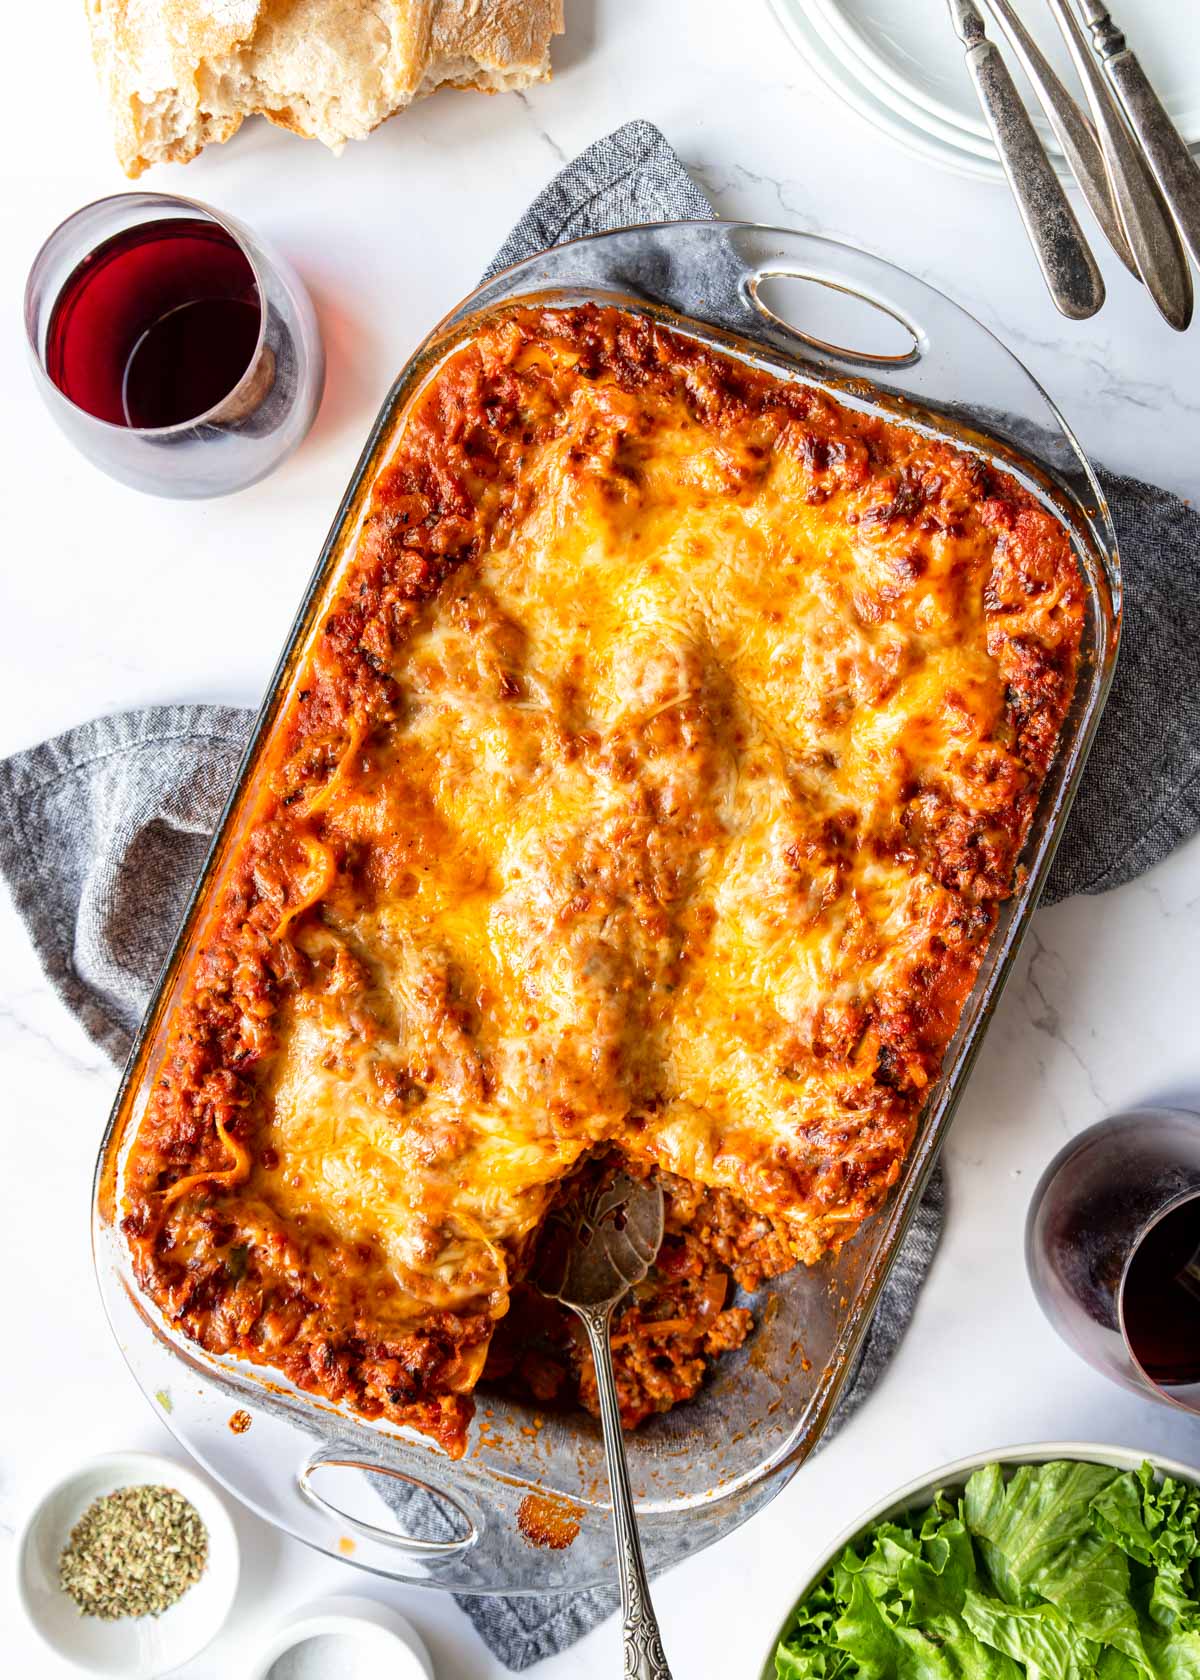 a table with a baked lasagna in the middle and wine, bread and salad around